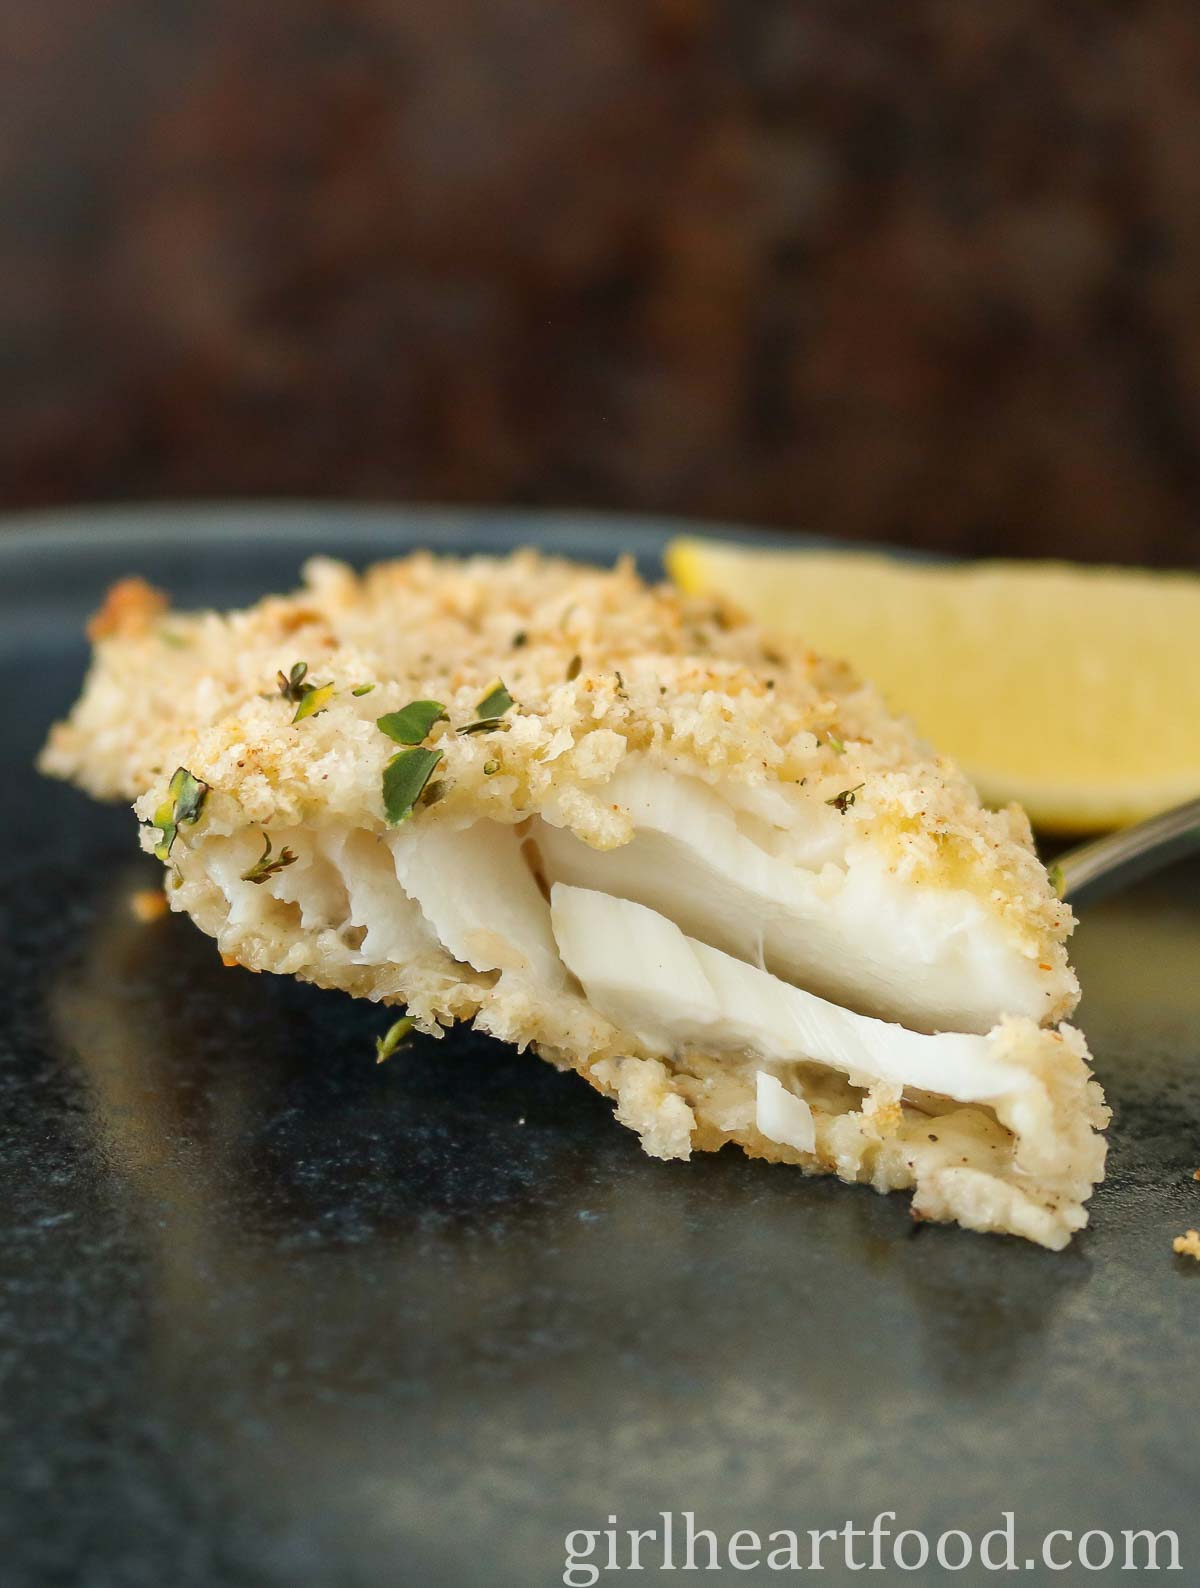 Close-up of a fillet of cooked cod, showing the interior texture.